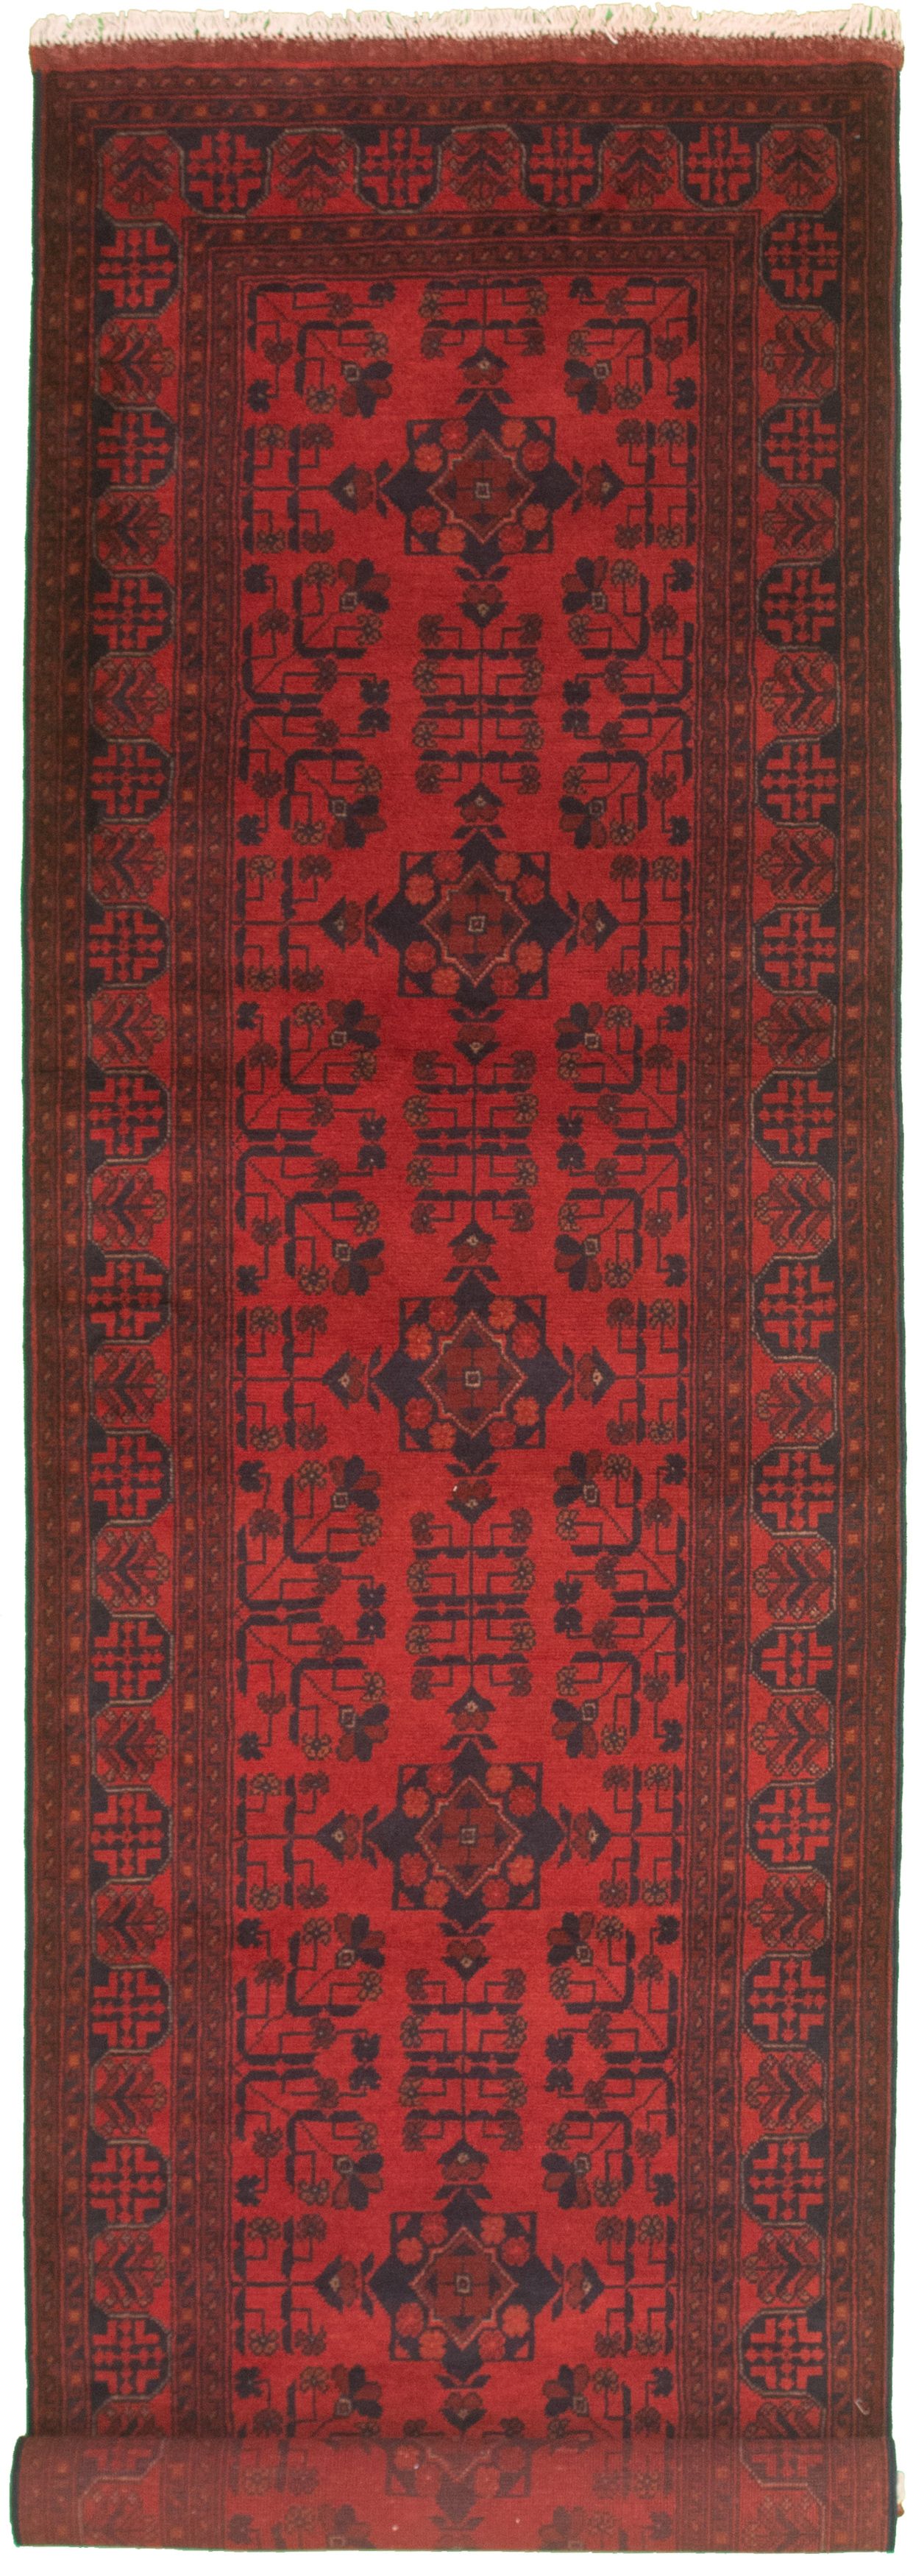 Hand-knotted Finest Khal Mohammadi Red Wool Rug 2'11" x 12'10" Size: 2'11" x 12'10"  